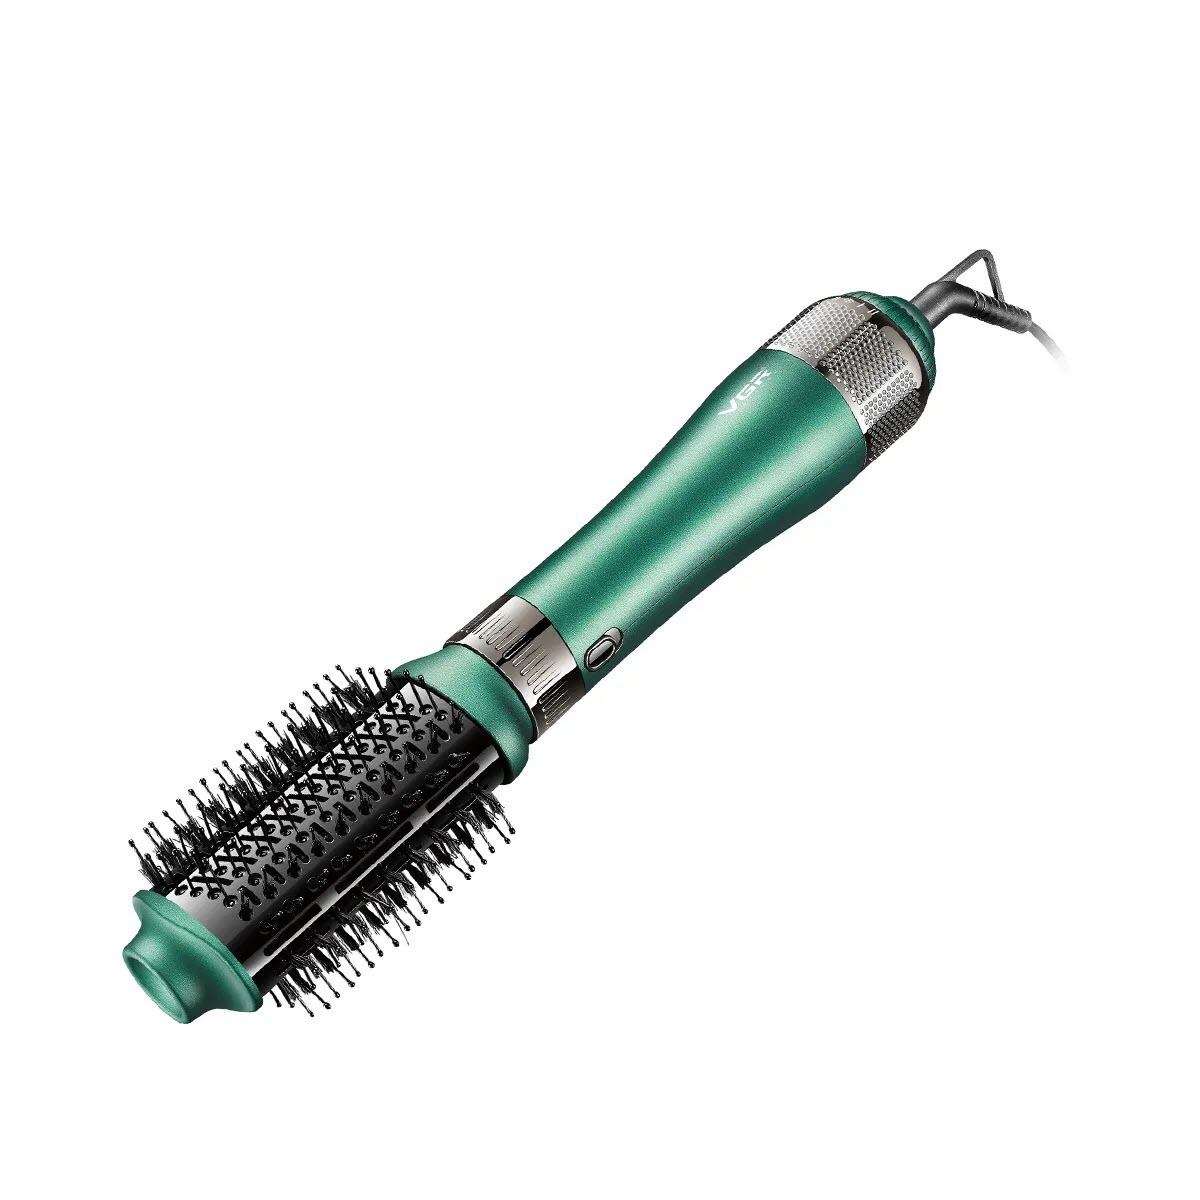 V-493 4 in1 hair dryer hot air brush comb